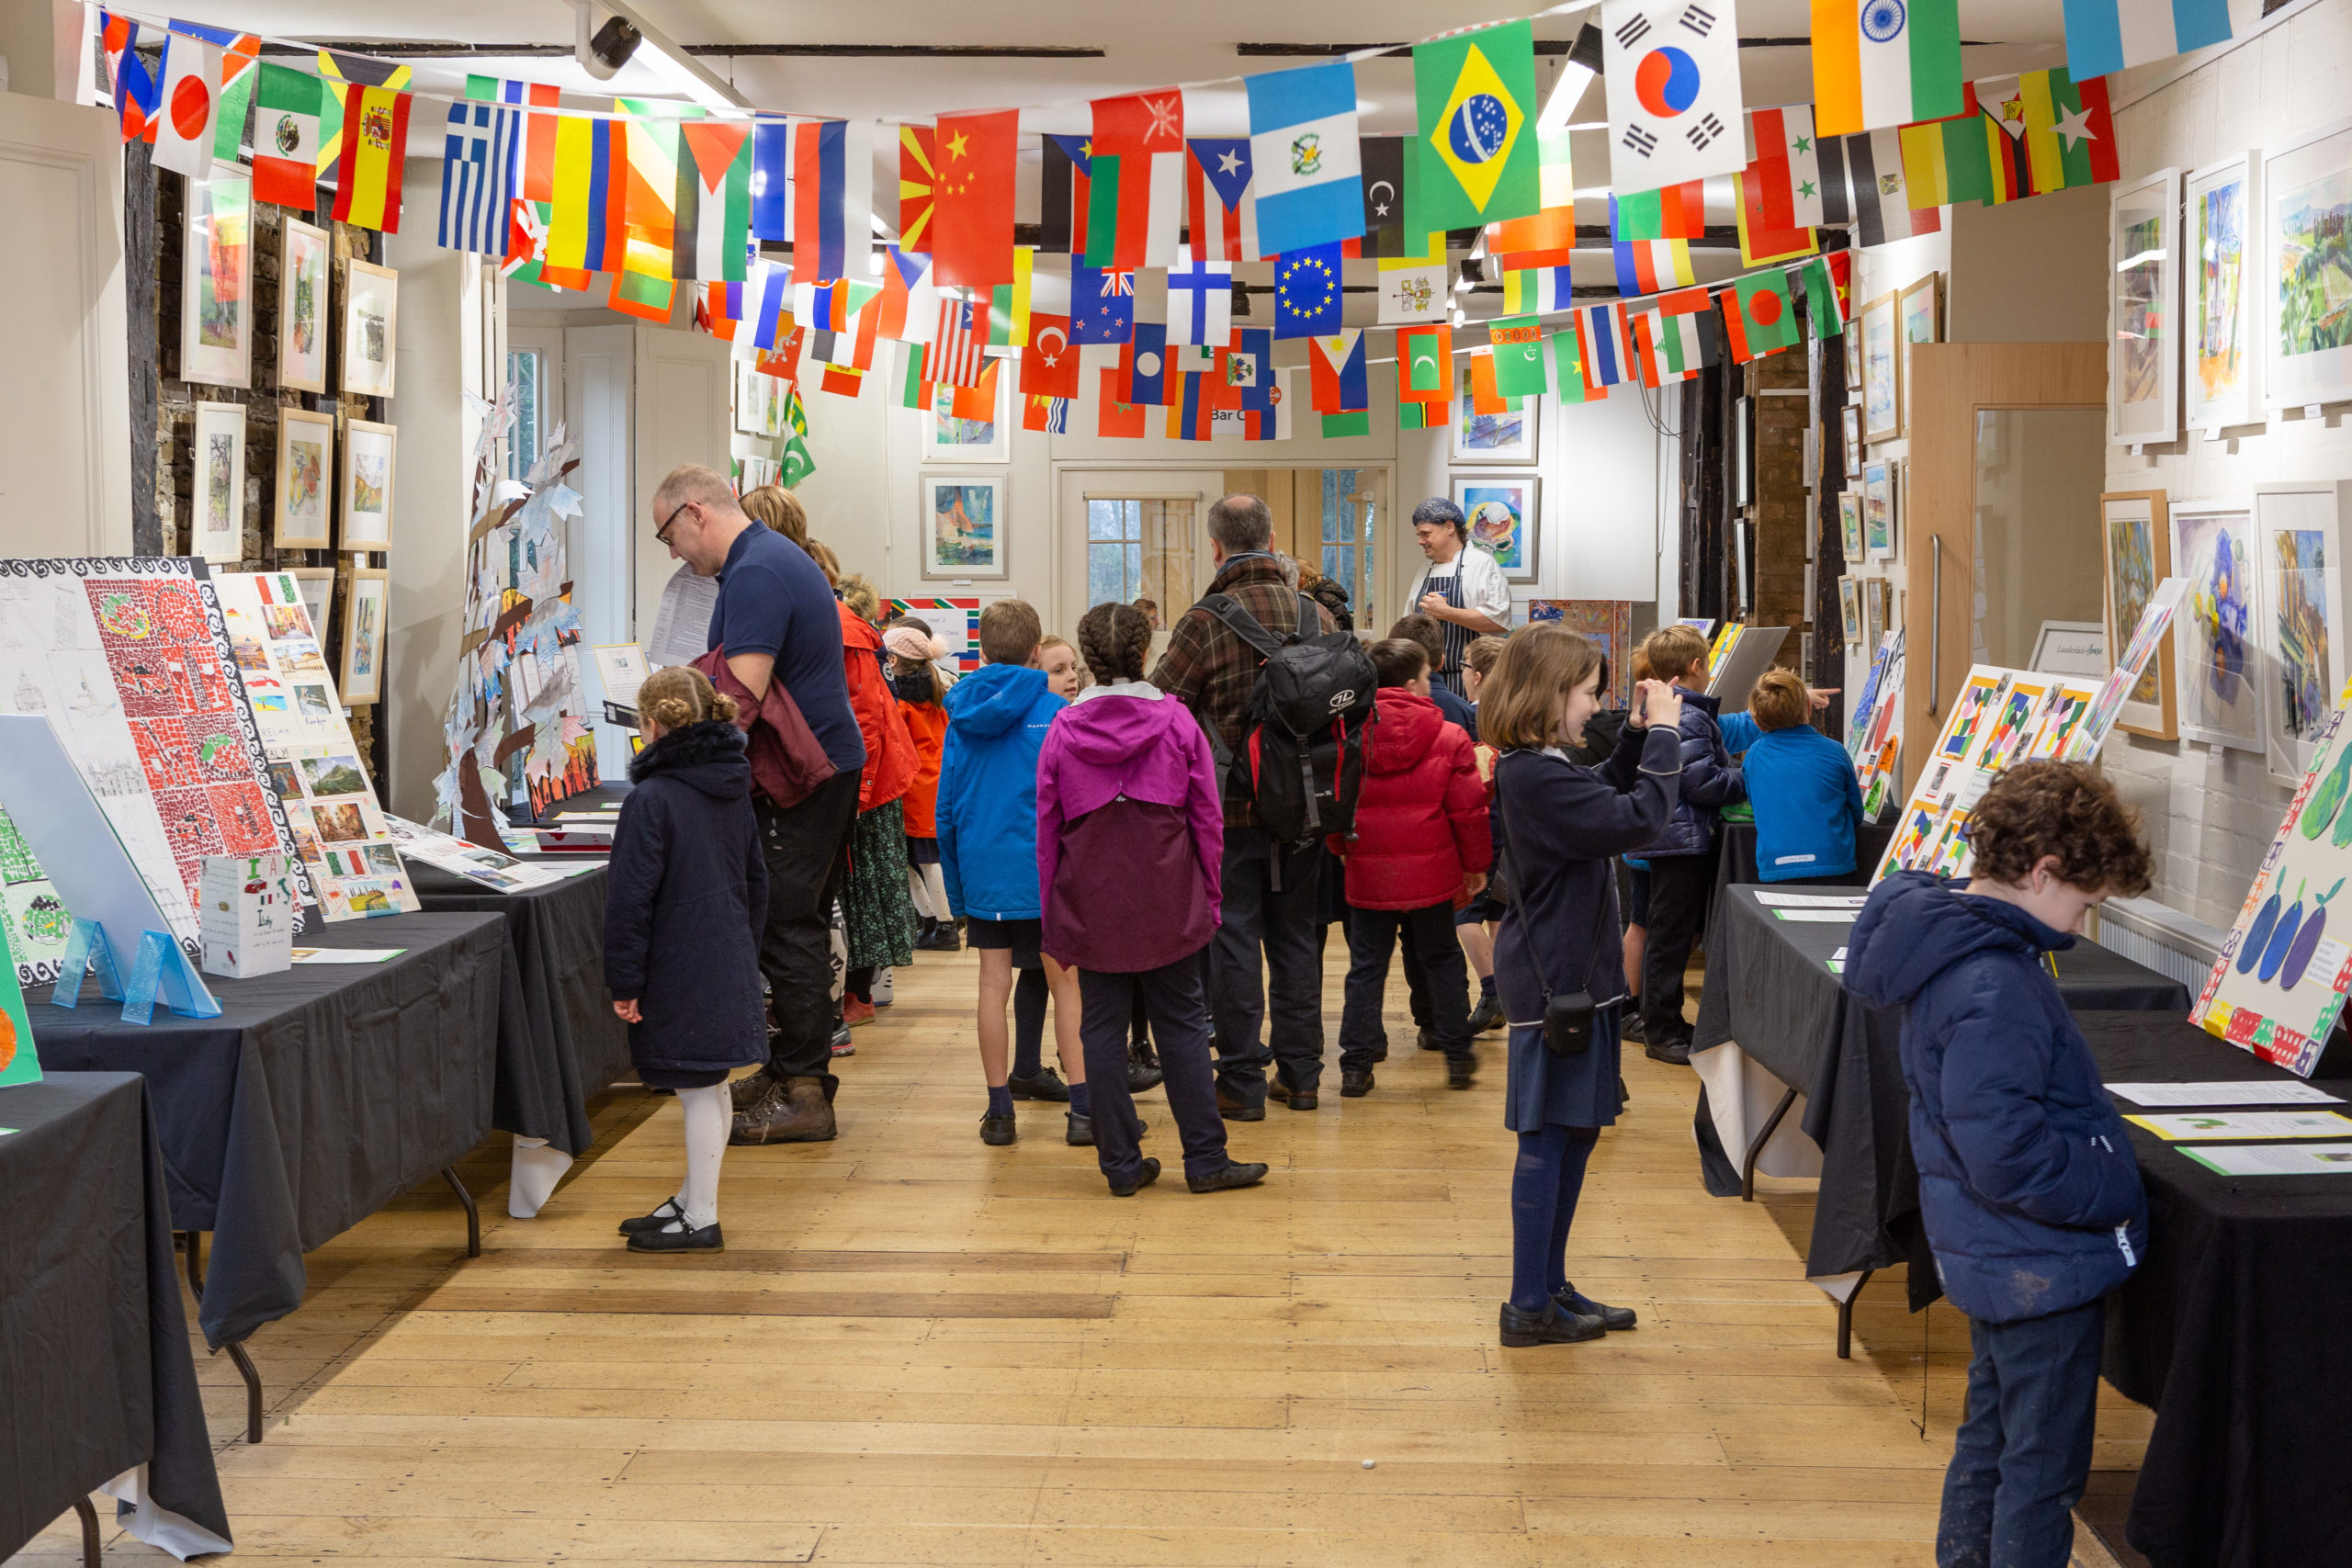 Children and teachers fill at a gallery at Lauderdale House decorated with flags from around the world.